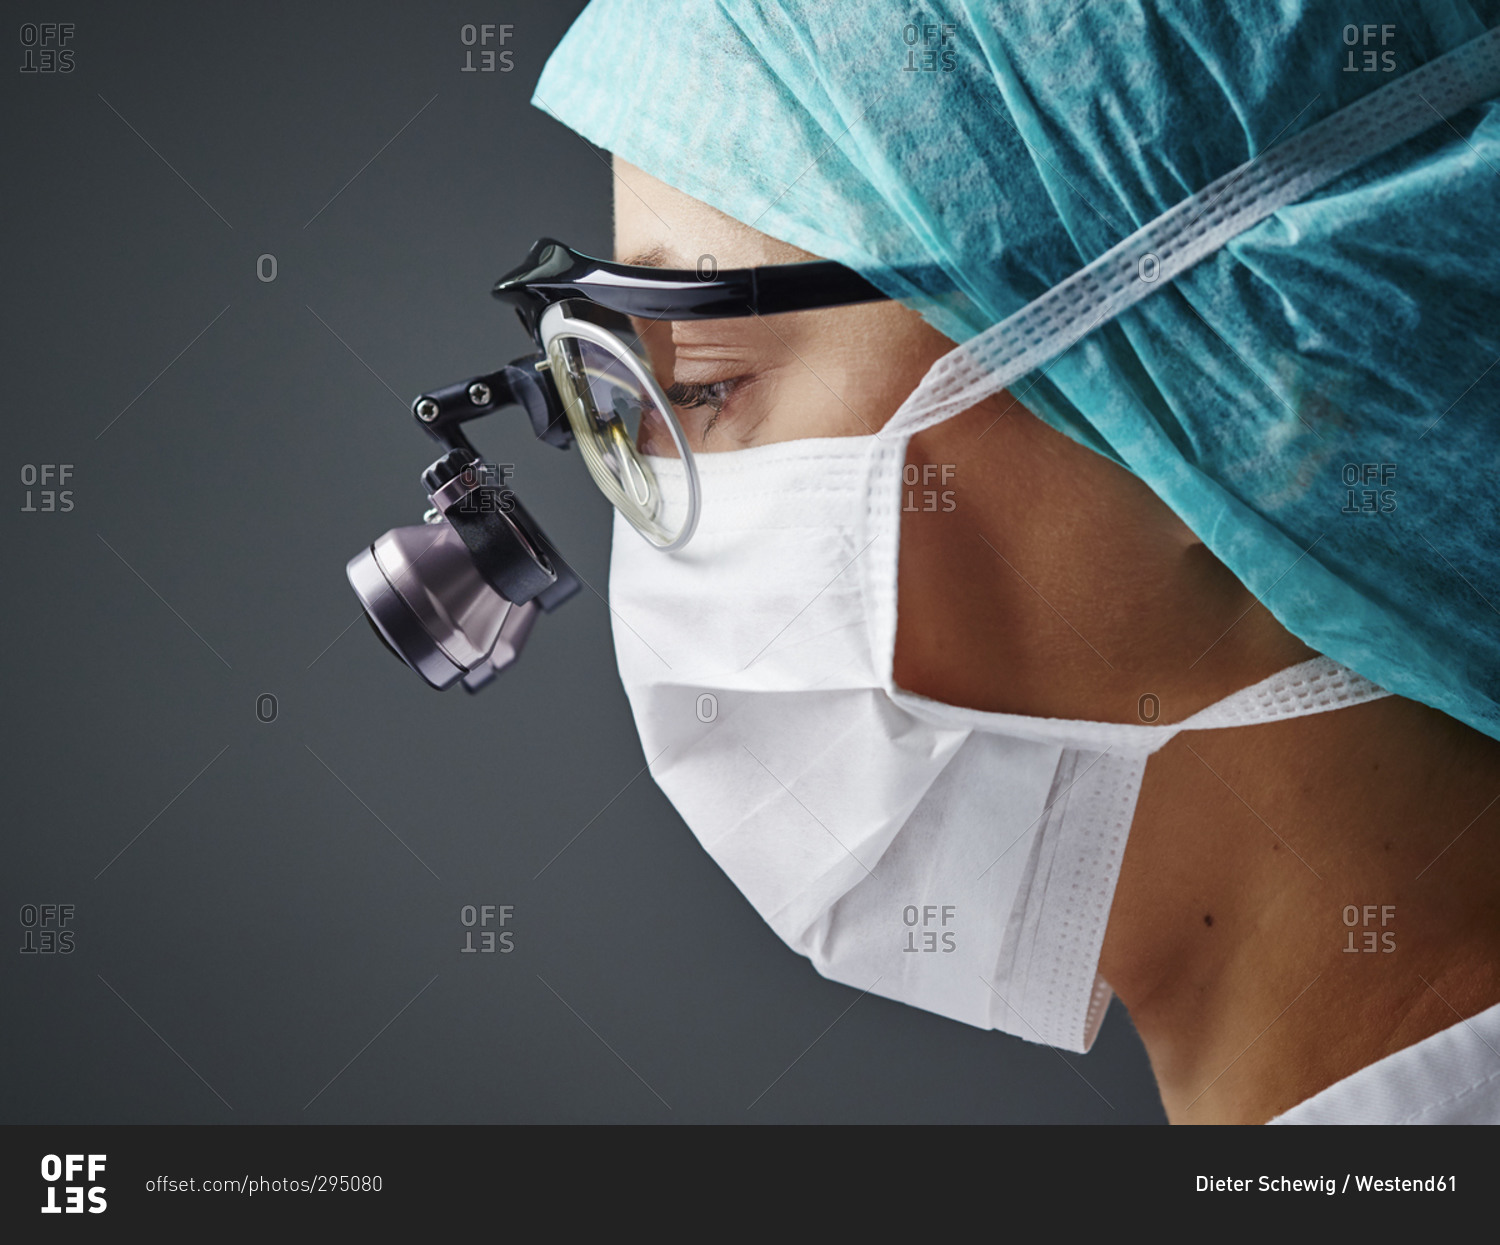 Young doctor wearing mask and magnifying spectacles